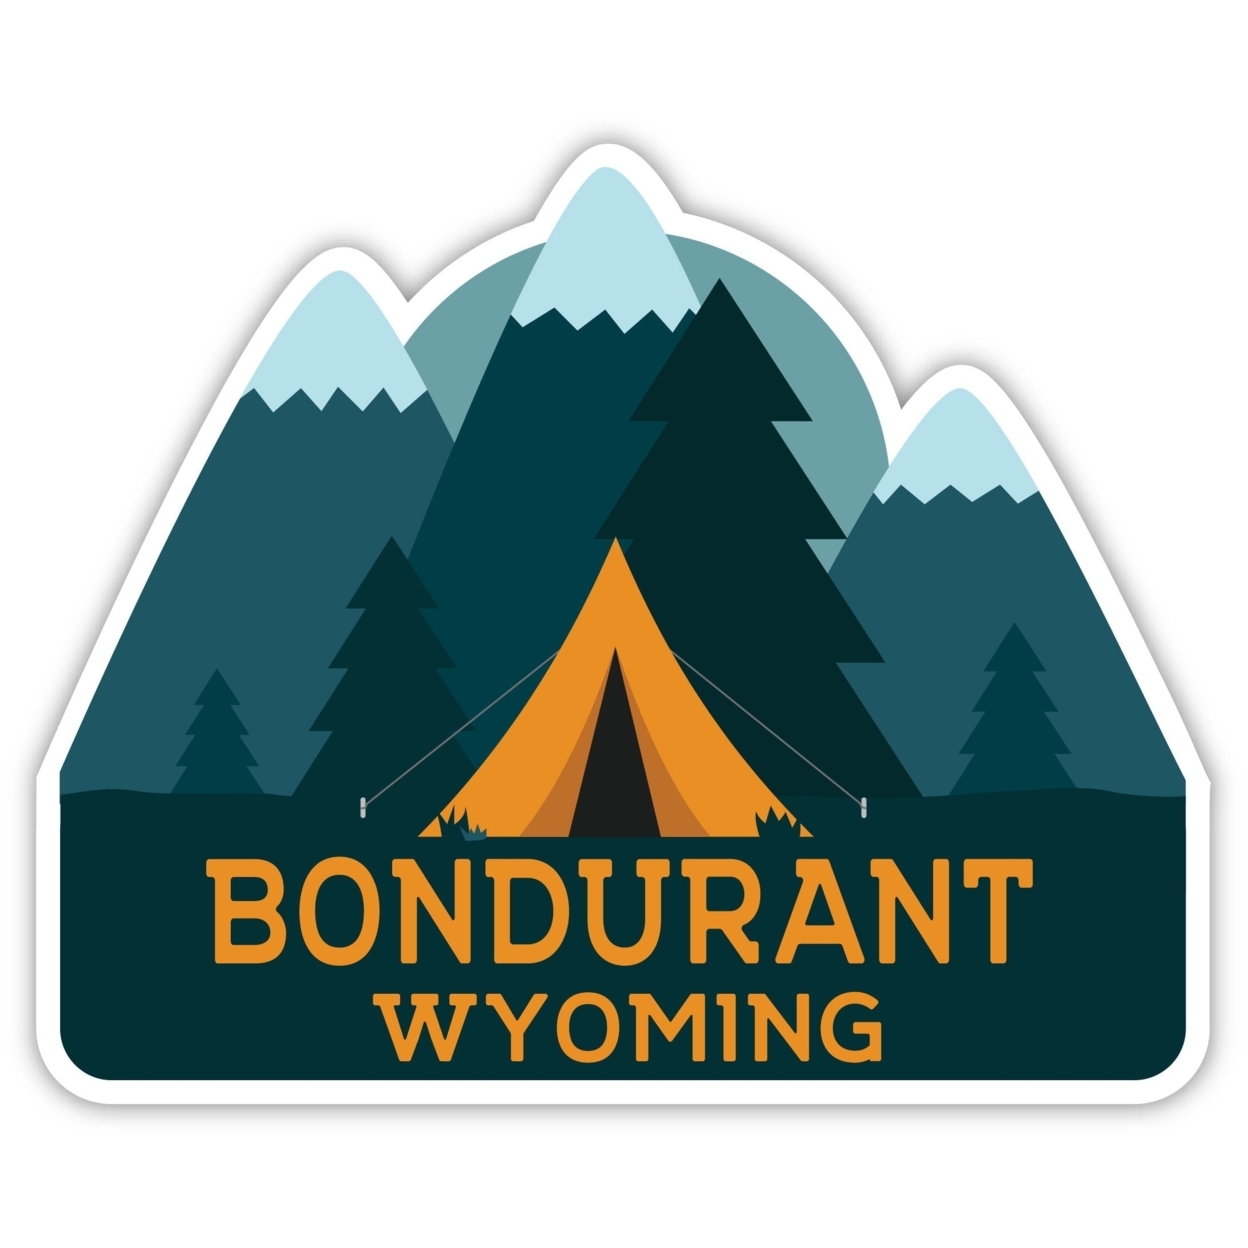 Bondurant Wyoming Souvenir Decorative Stickers (Choose Theme And Size) - 4-Pack, 10-Inch, Tent